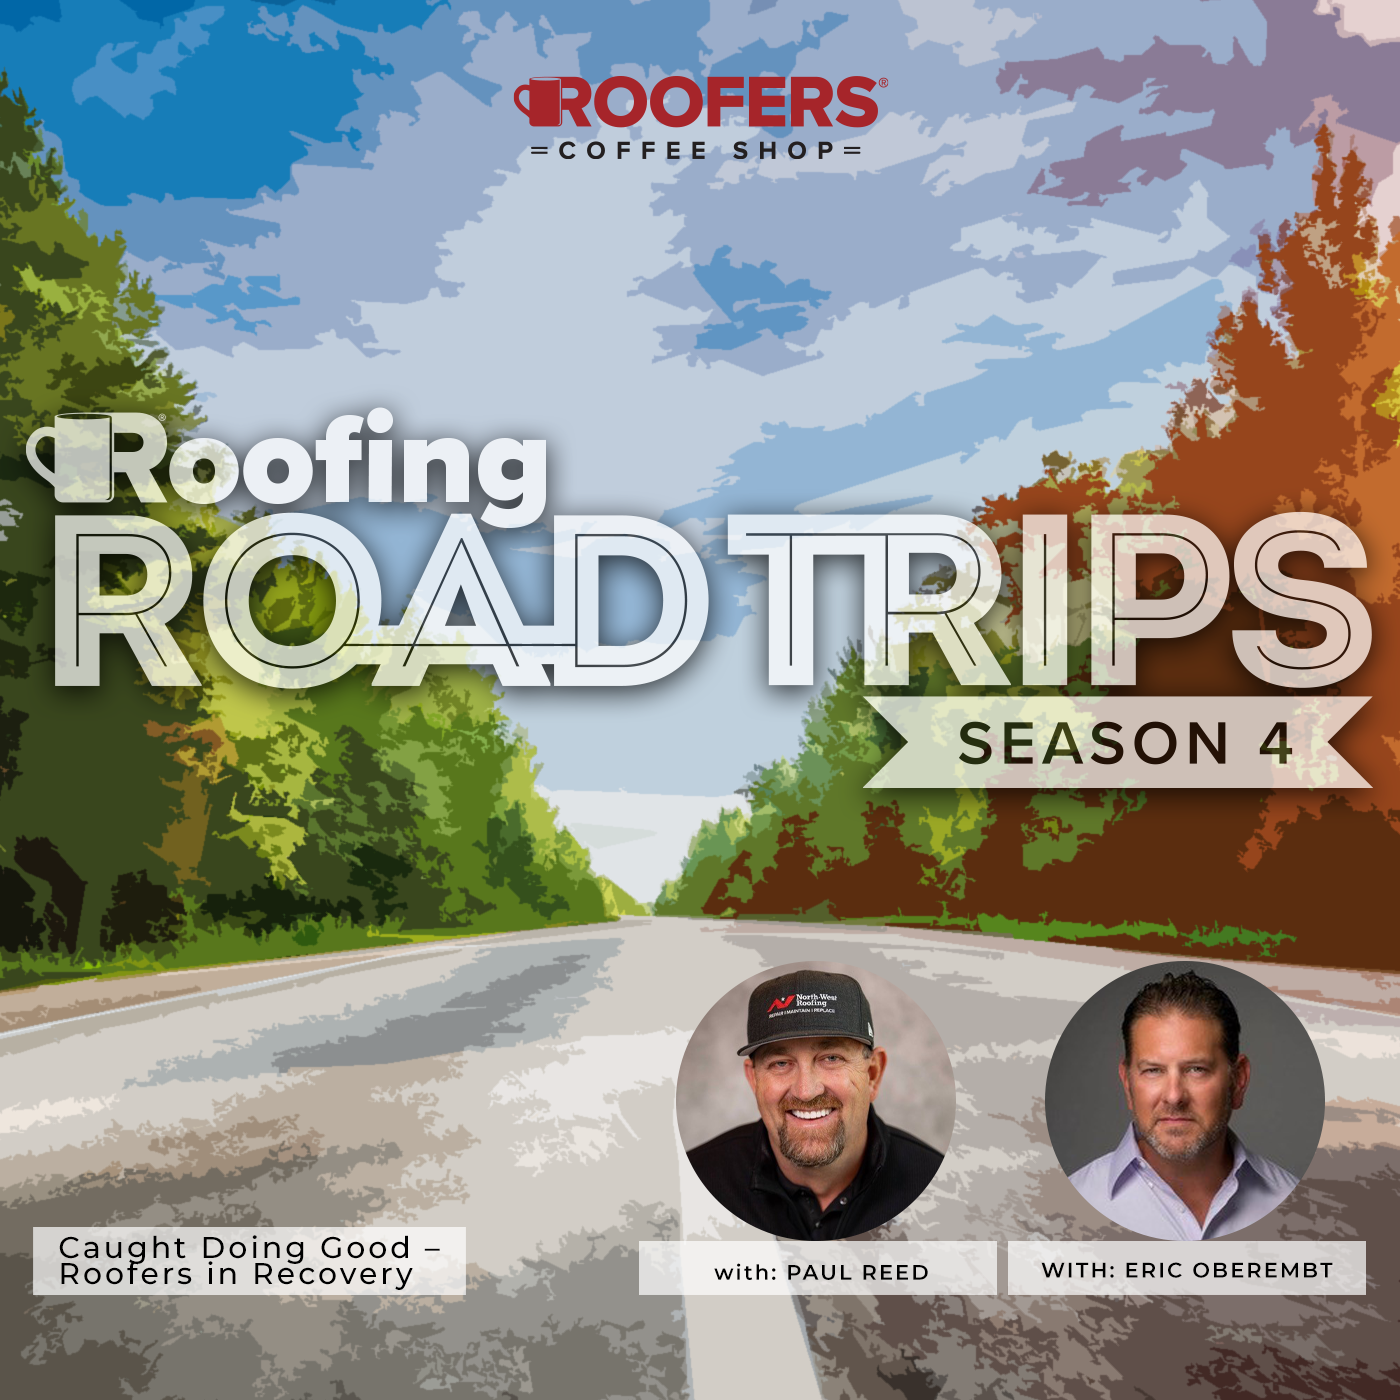 Paul Reed and Eric Oberembt - Caught Doing Good with Roofers in Recovery - POD